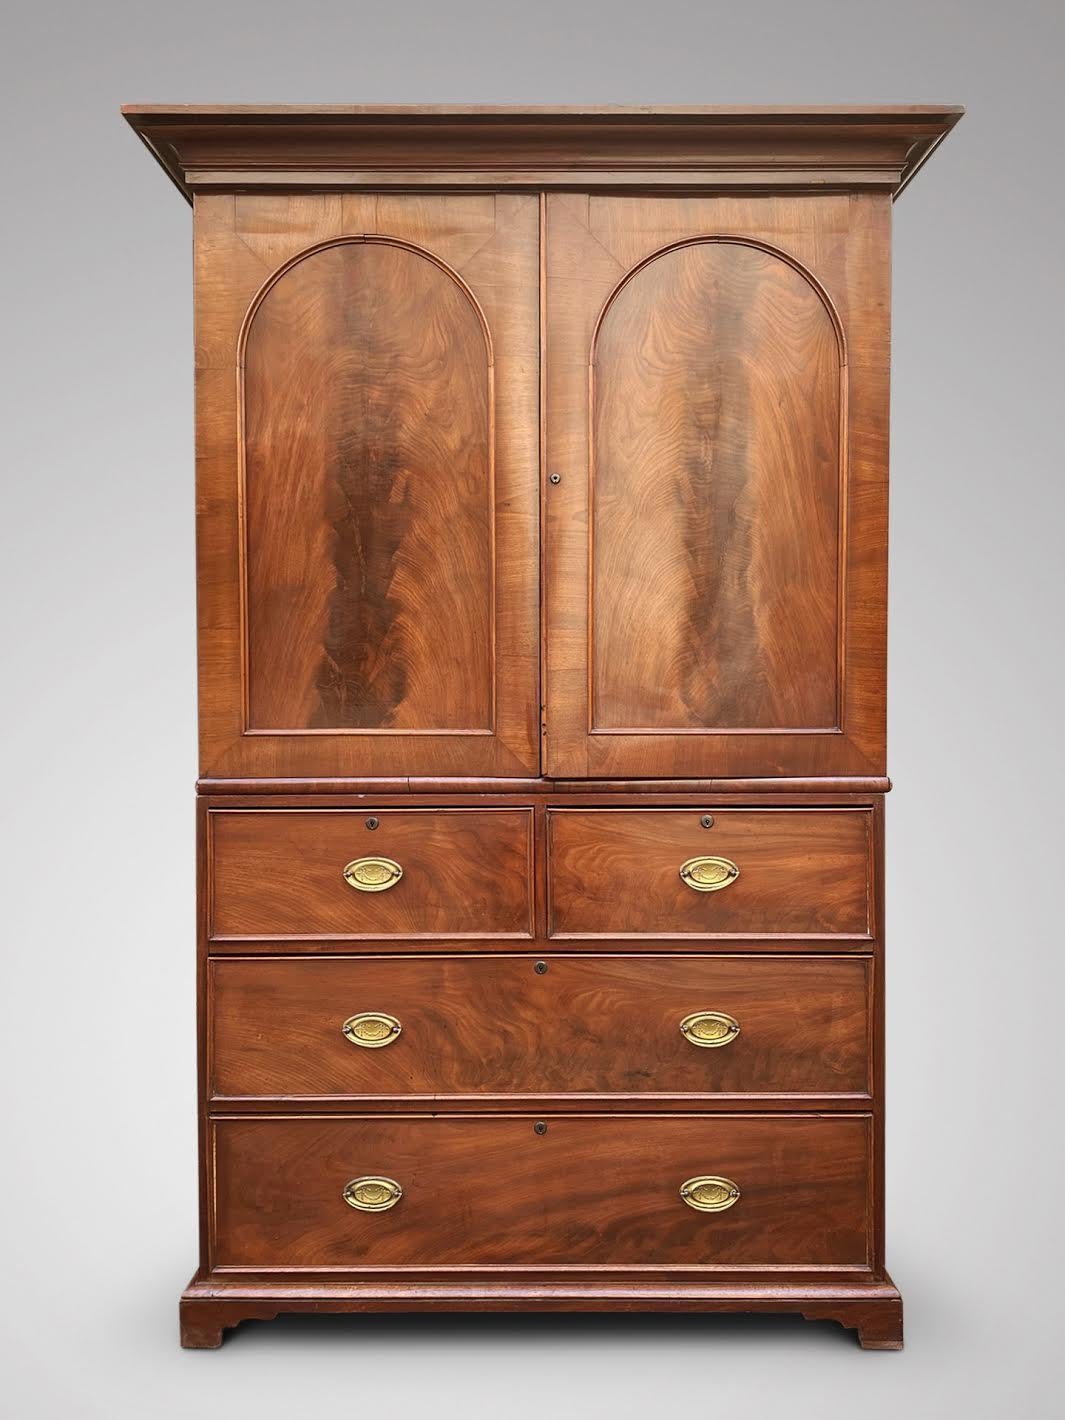 A good quality mid 19th century mahogany linen press in a rich light honey colour, with arched shaped doors that open to two fully sliding drawers that slide out , the lower section with two small and two long graduated drawers brass plate handles,